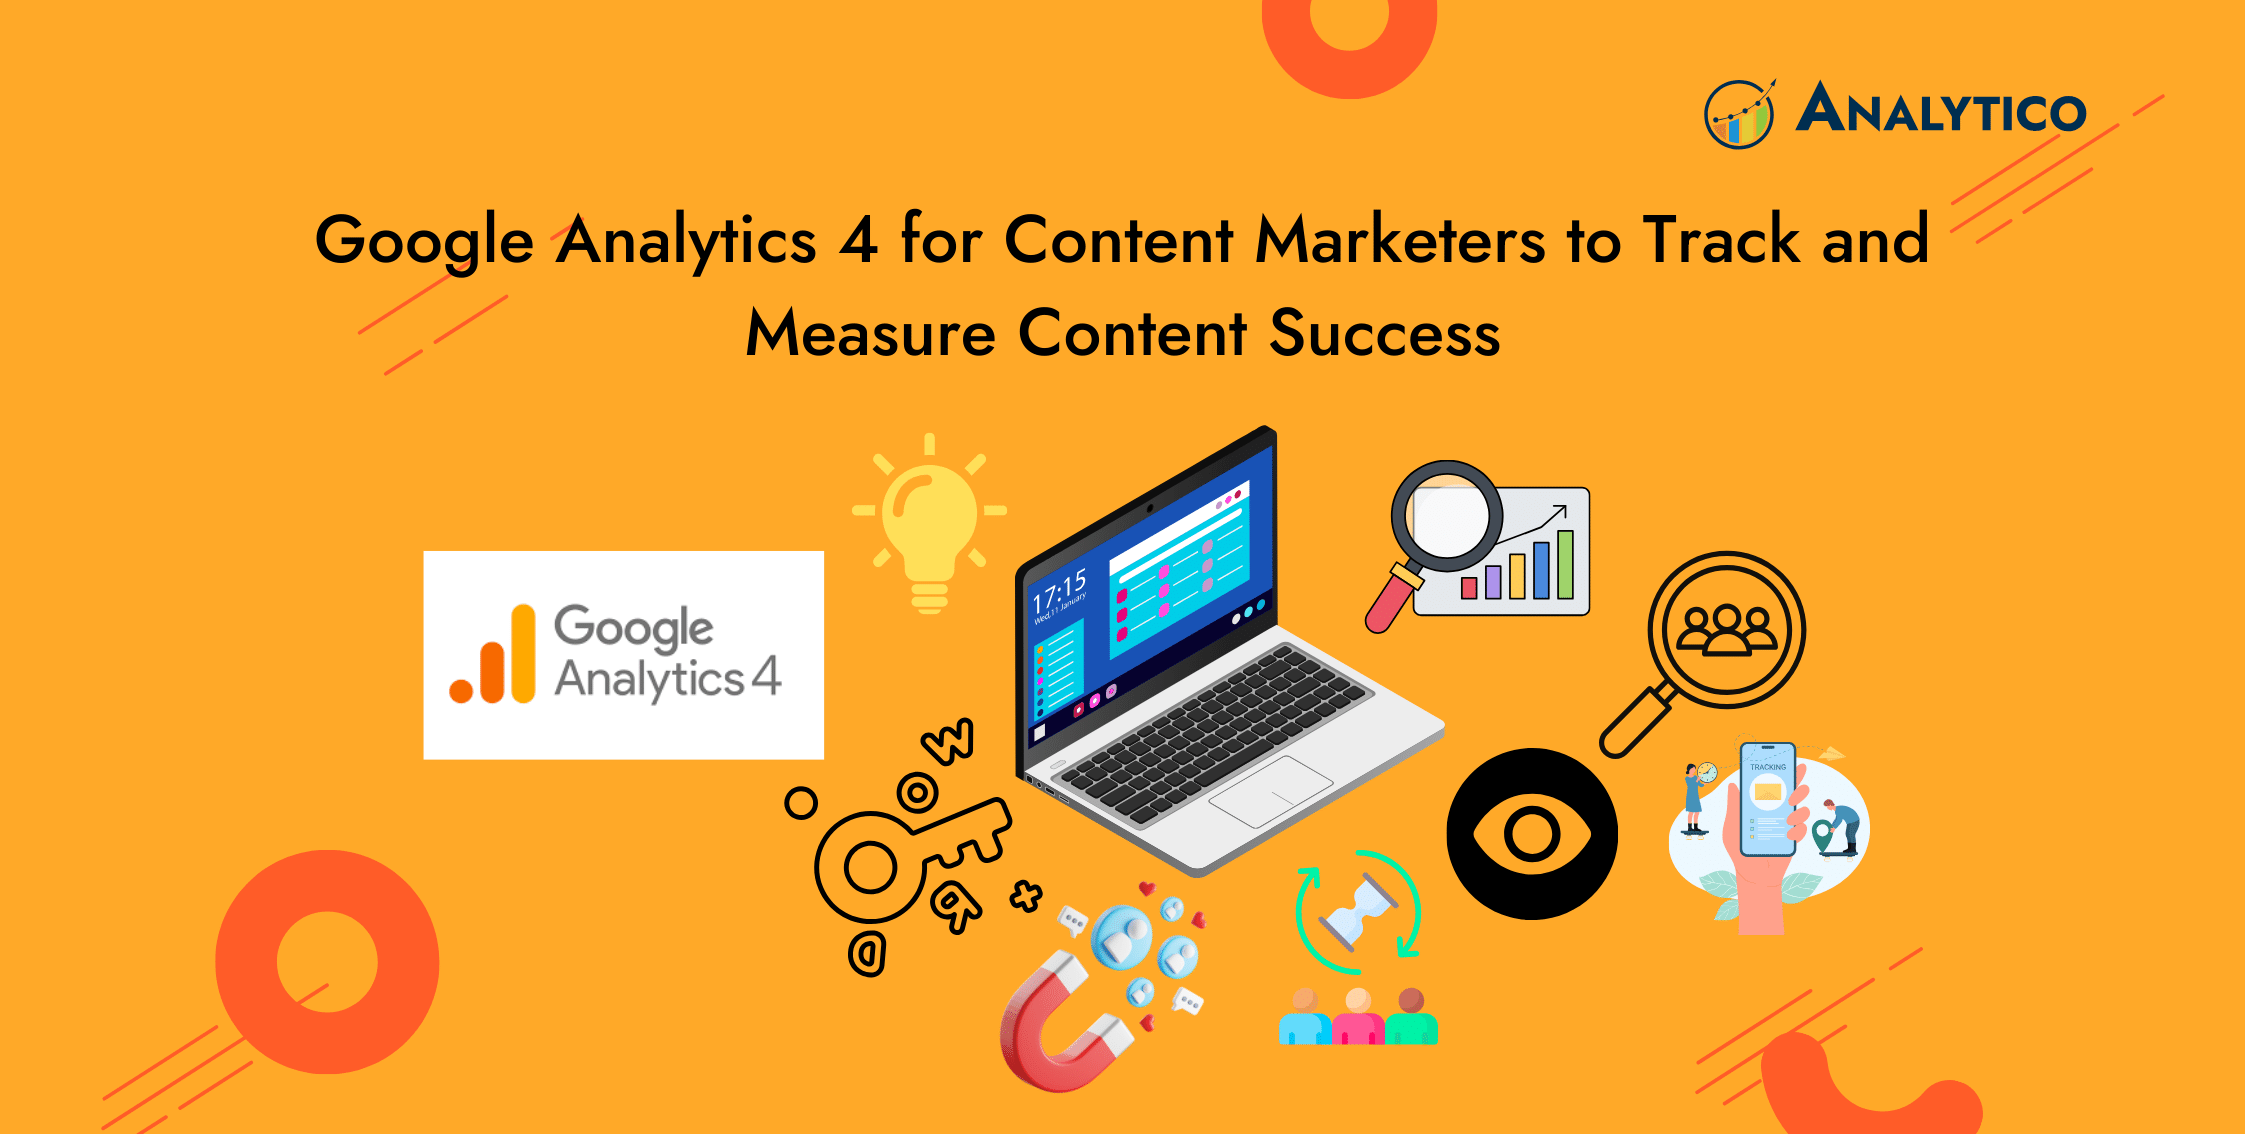 Google Analytics 4 for Content Marketers to Measure Content Success